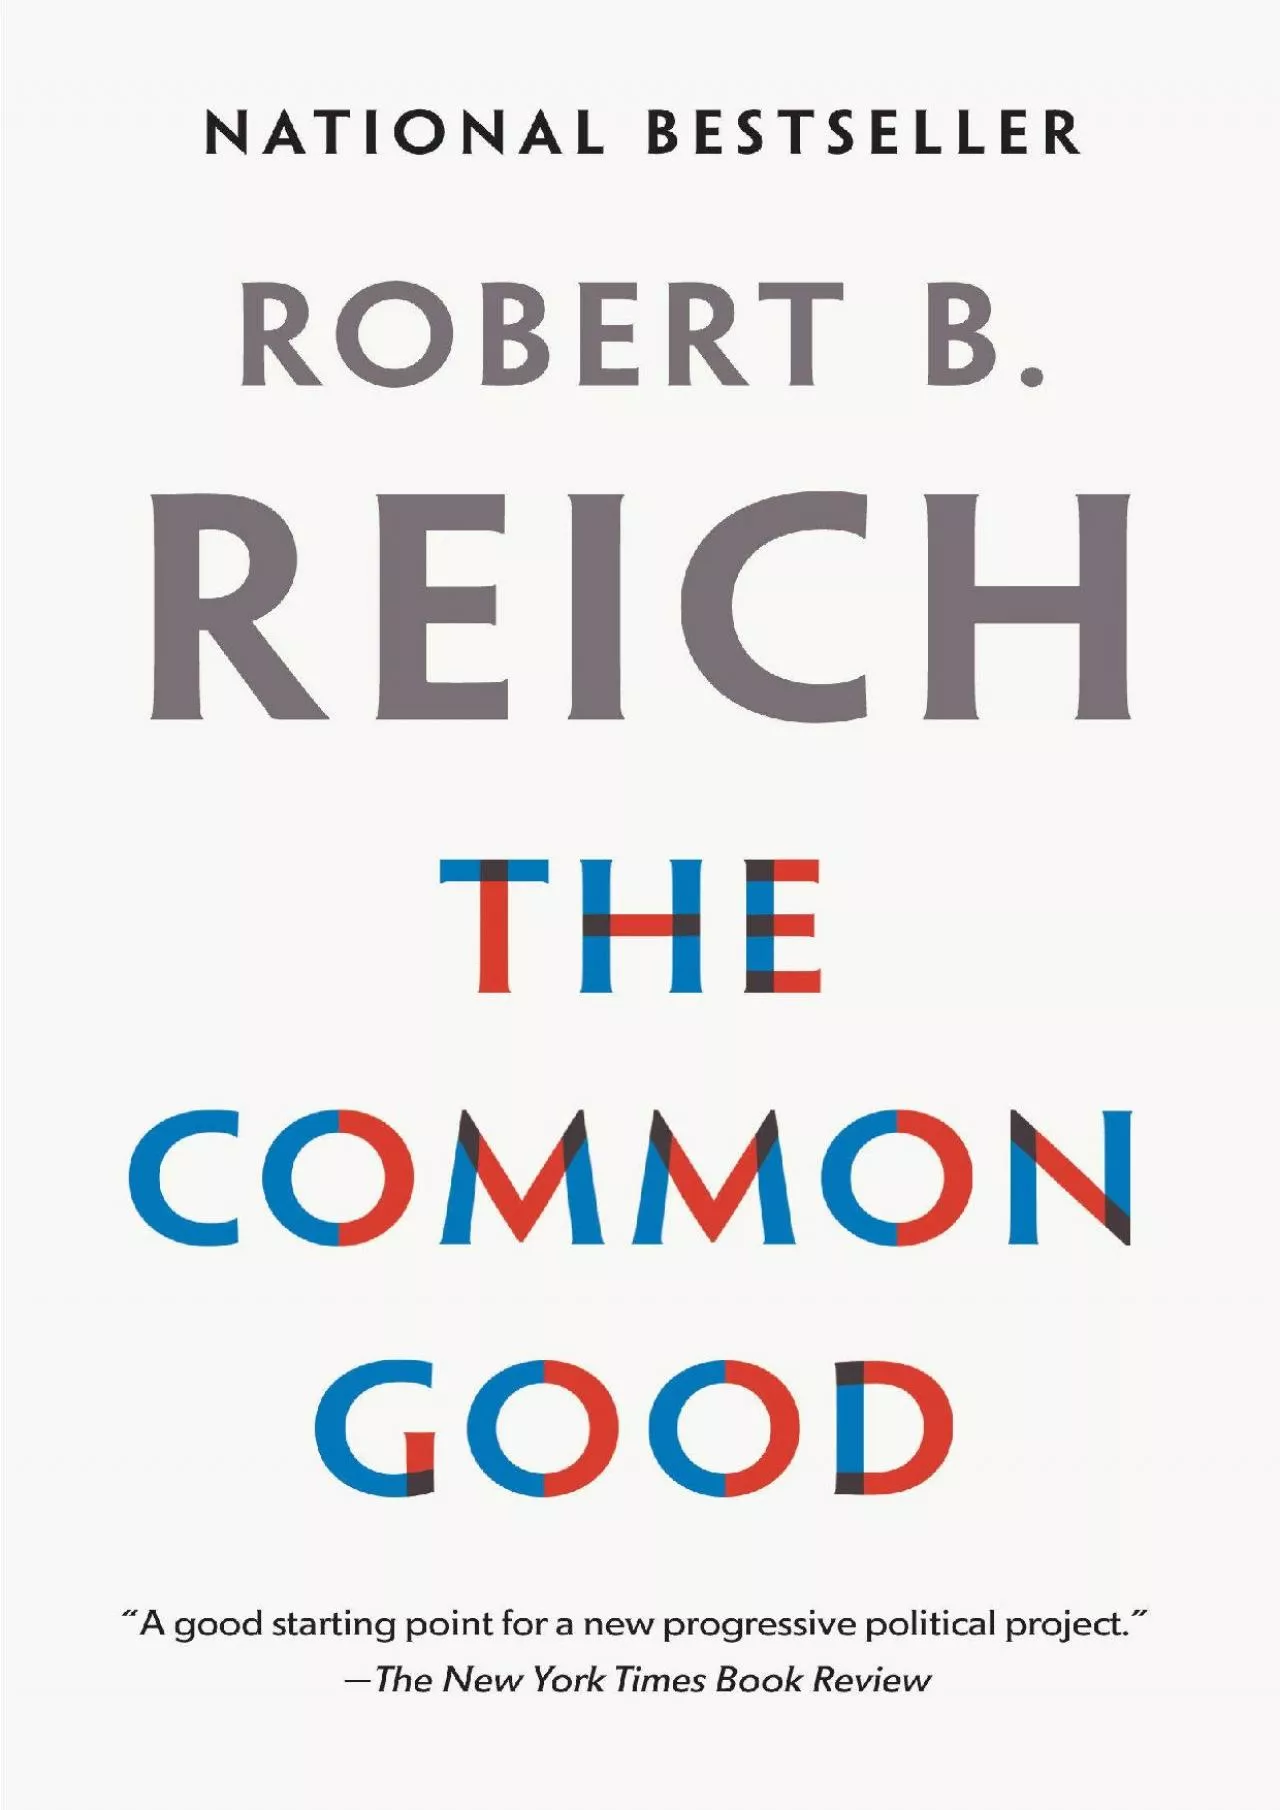 (BOOK)-The Common Good